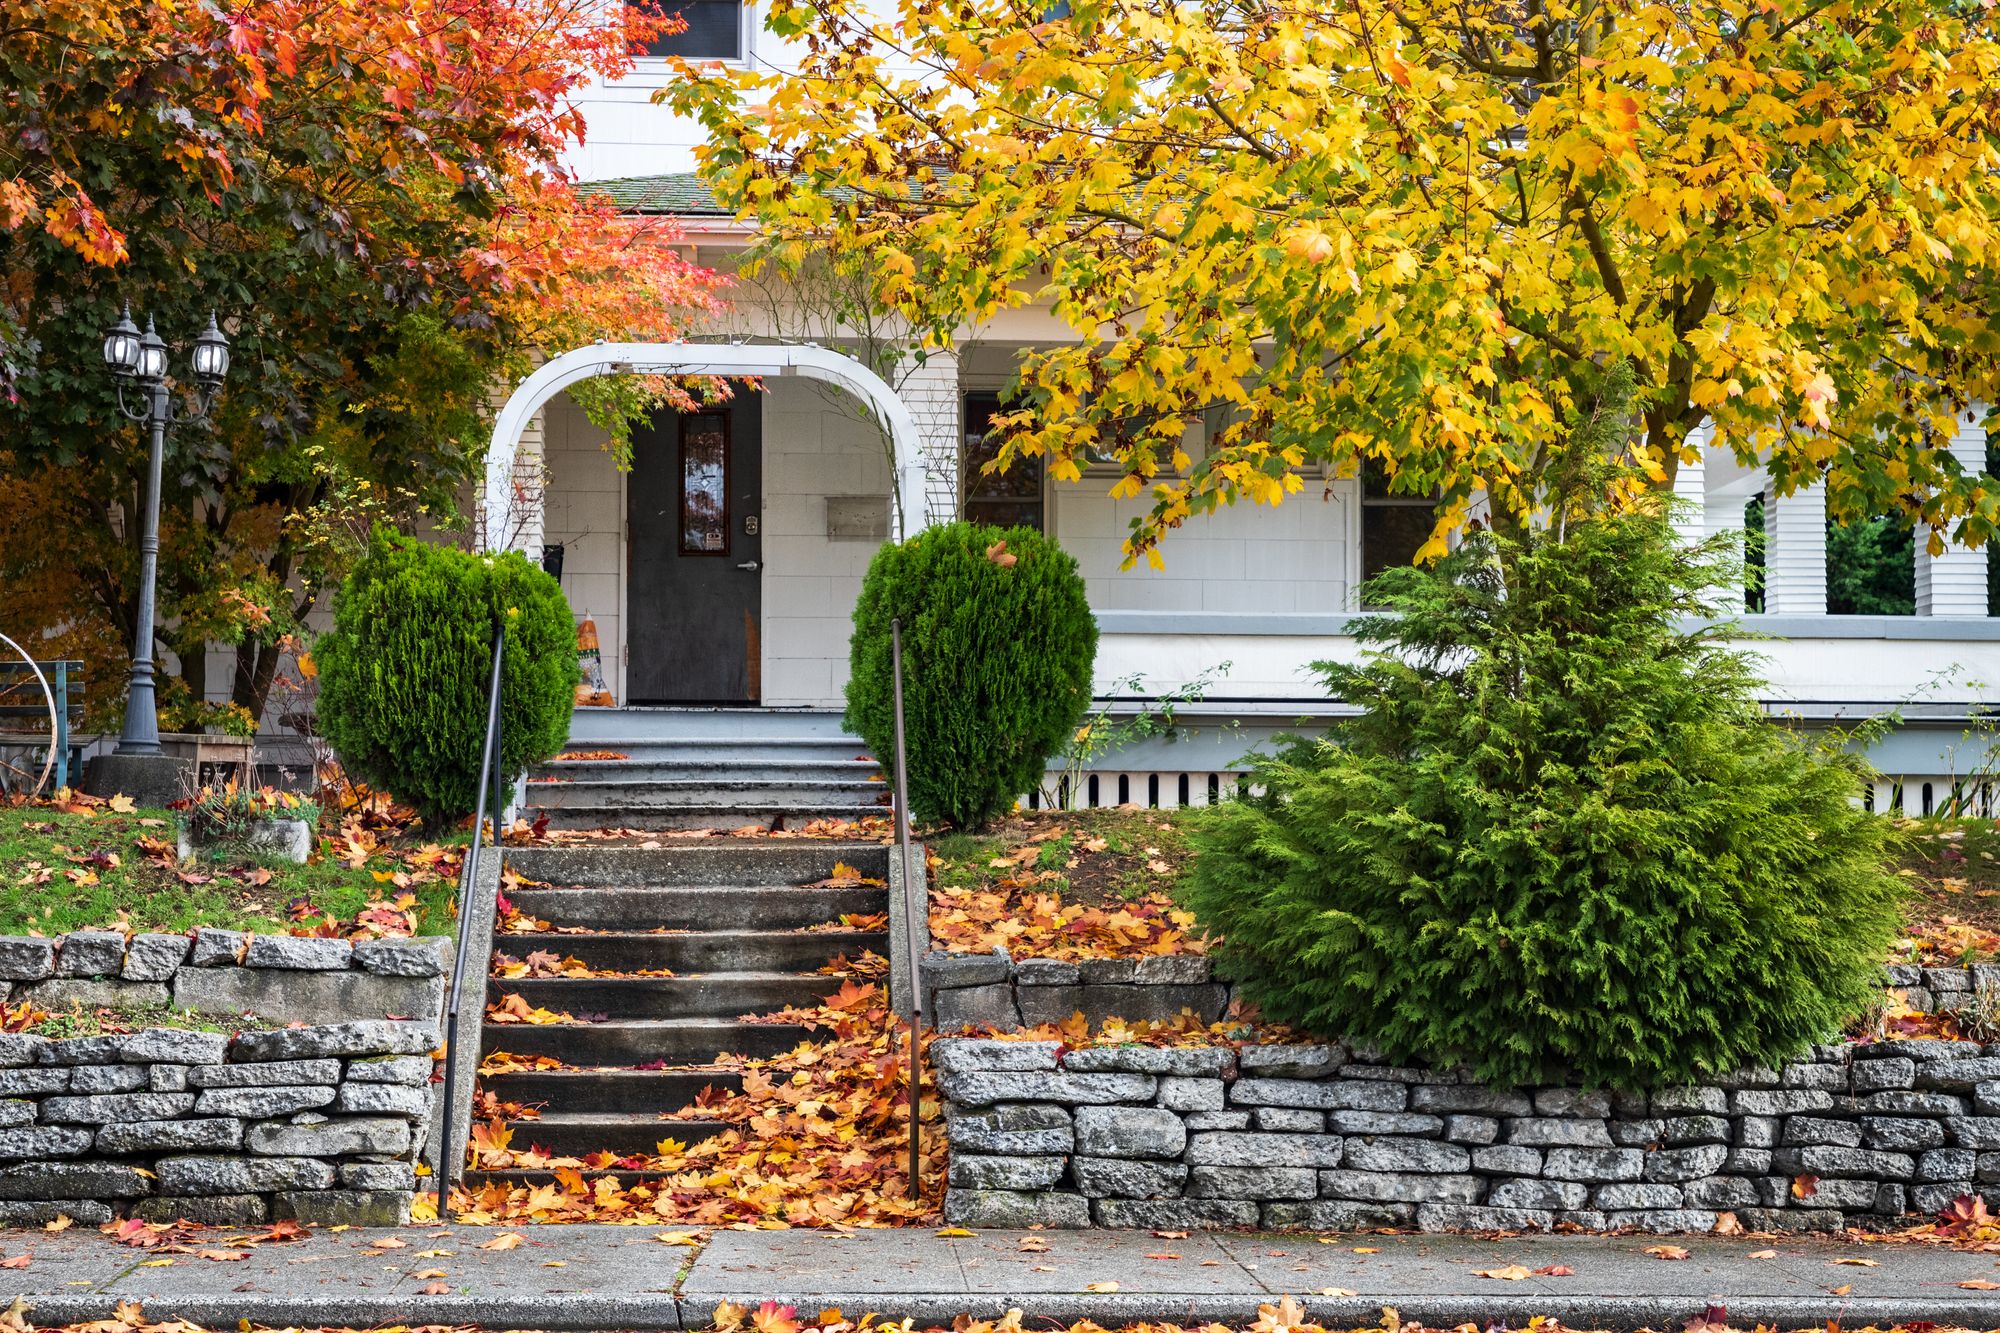 7 Easy Steps To Prepare Your Home For Fall